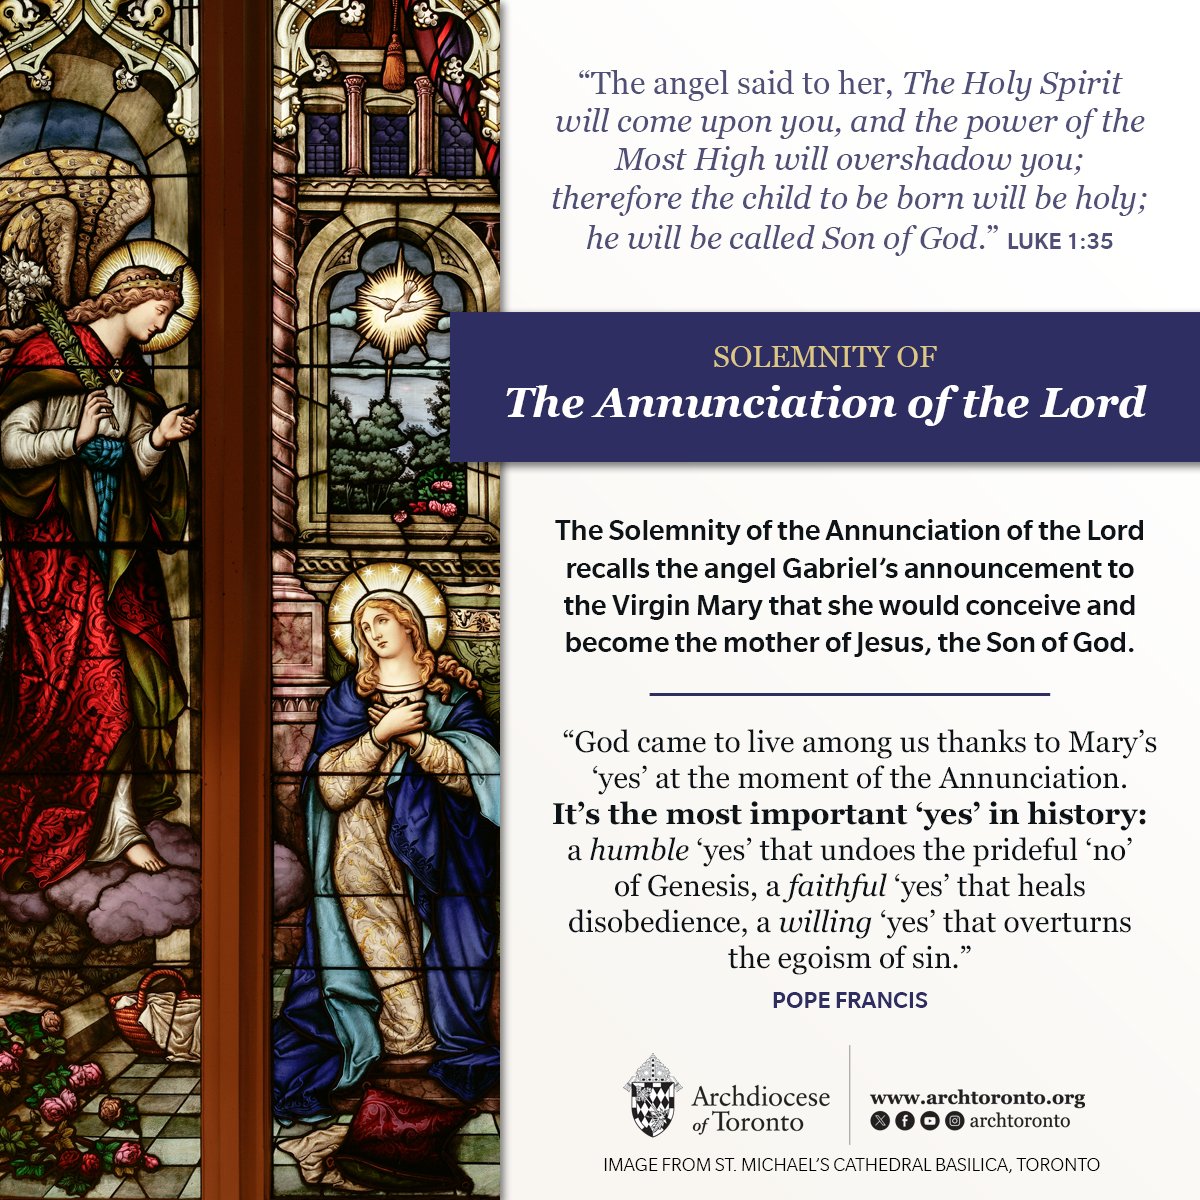 The Solemnity of the Annunciation of the Lord recalls the angel Gabriel’s announcement to the Virgin Mary that she would conceive and become the mother of Jesus, the Son of God. #HailMary